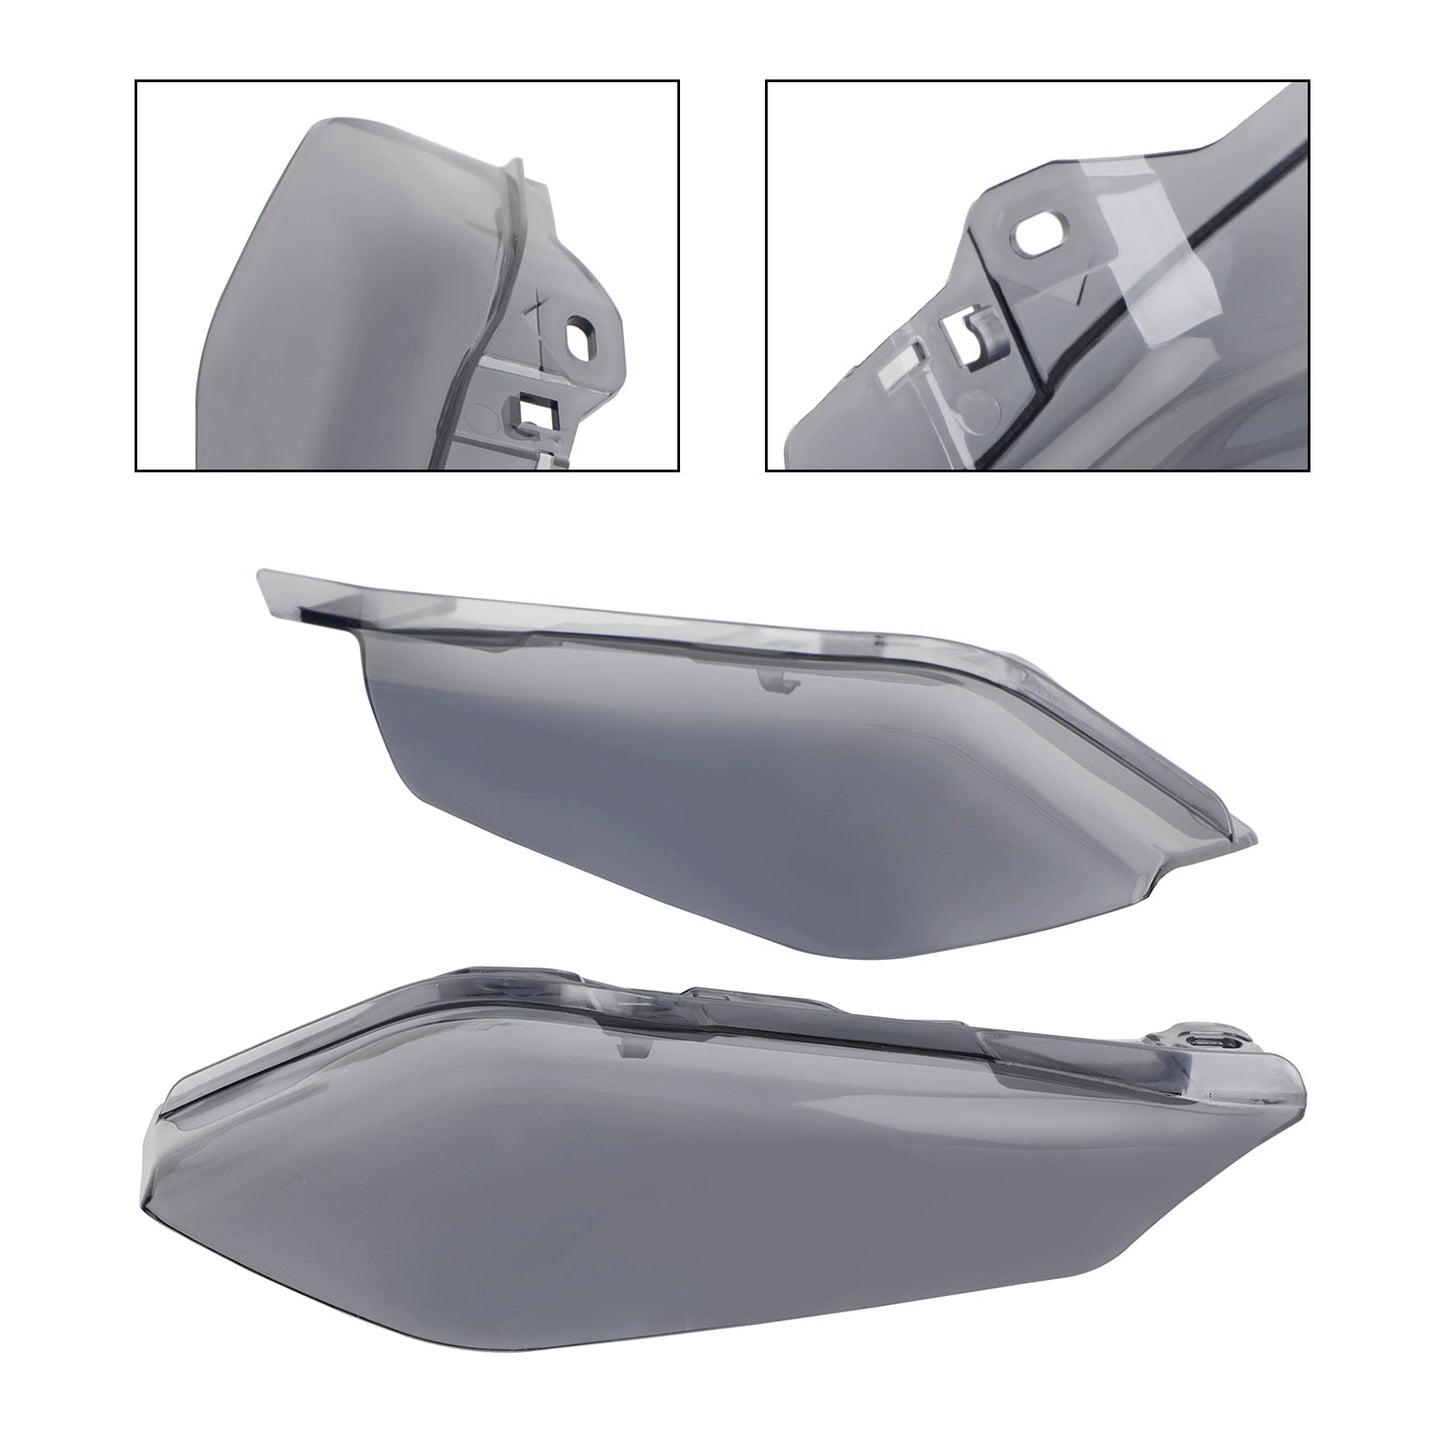 Mid-Frame Air Heat Deflector Trim Shield fit for Touring and Trike models 17-21